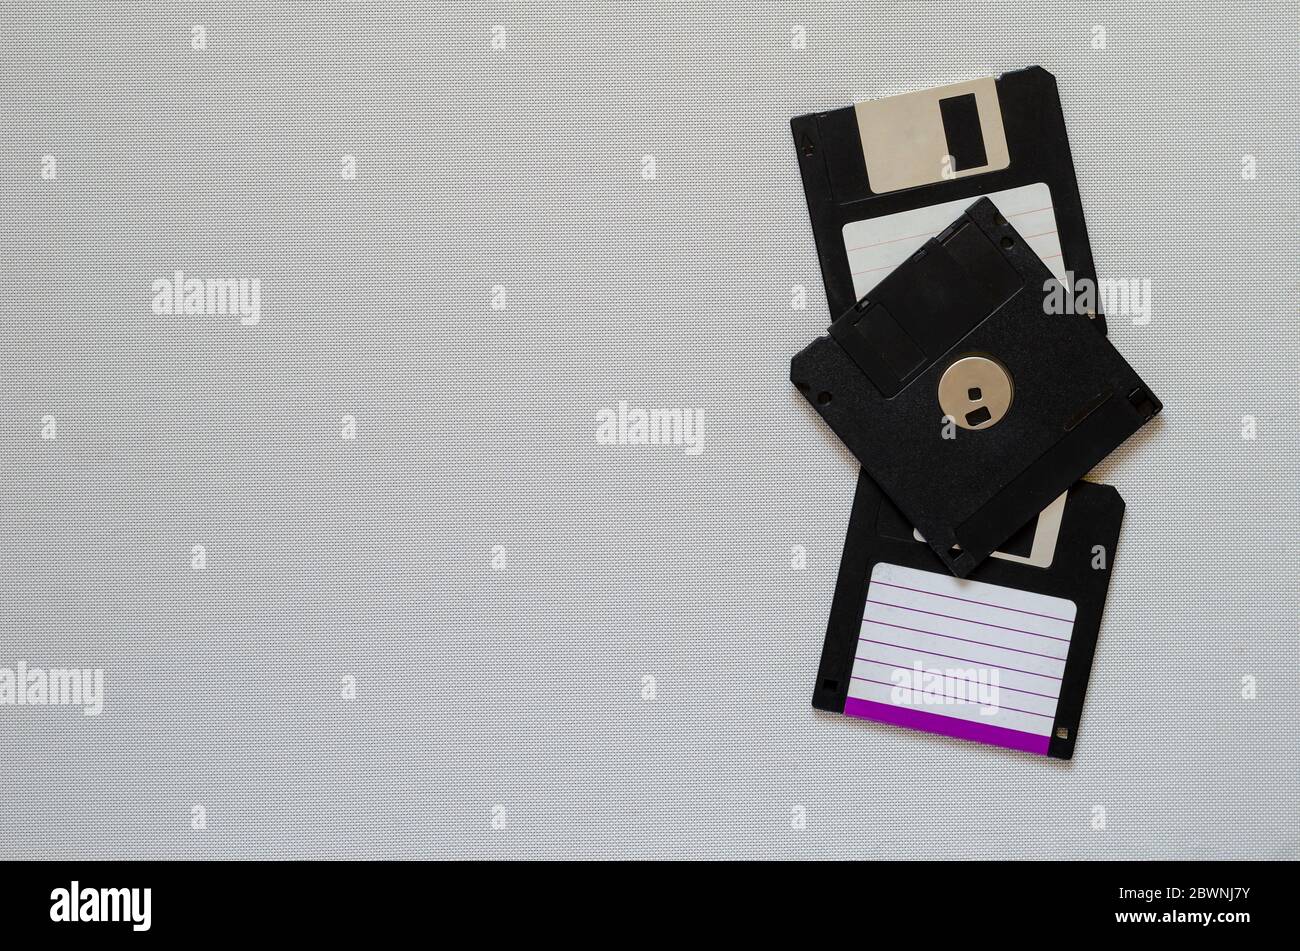 3.5 inch magnetic floppy disks. Three floppy disks with a capacity of 1.44 MB. Obsolete digital data storage media. Copy space Stock Photo